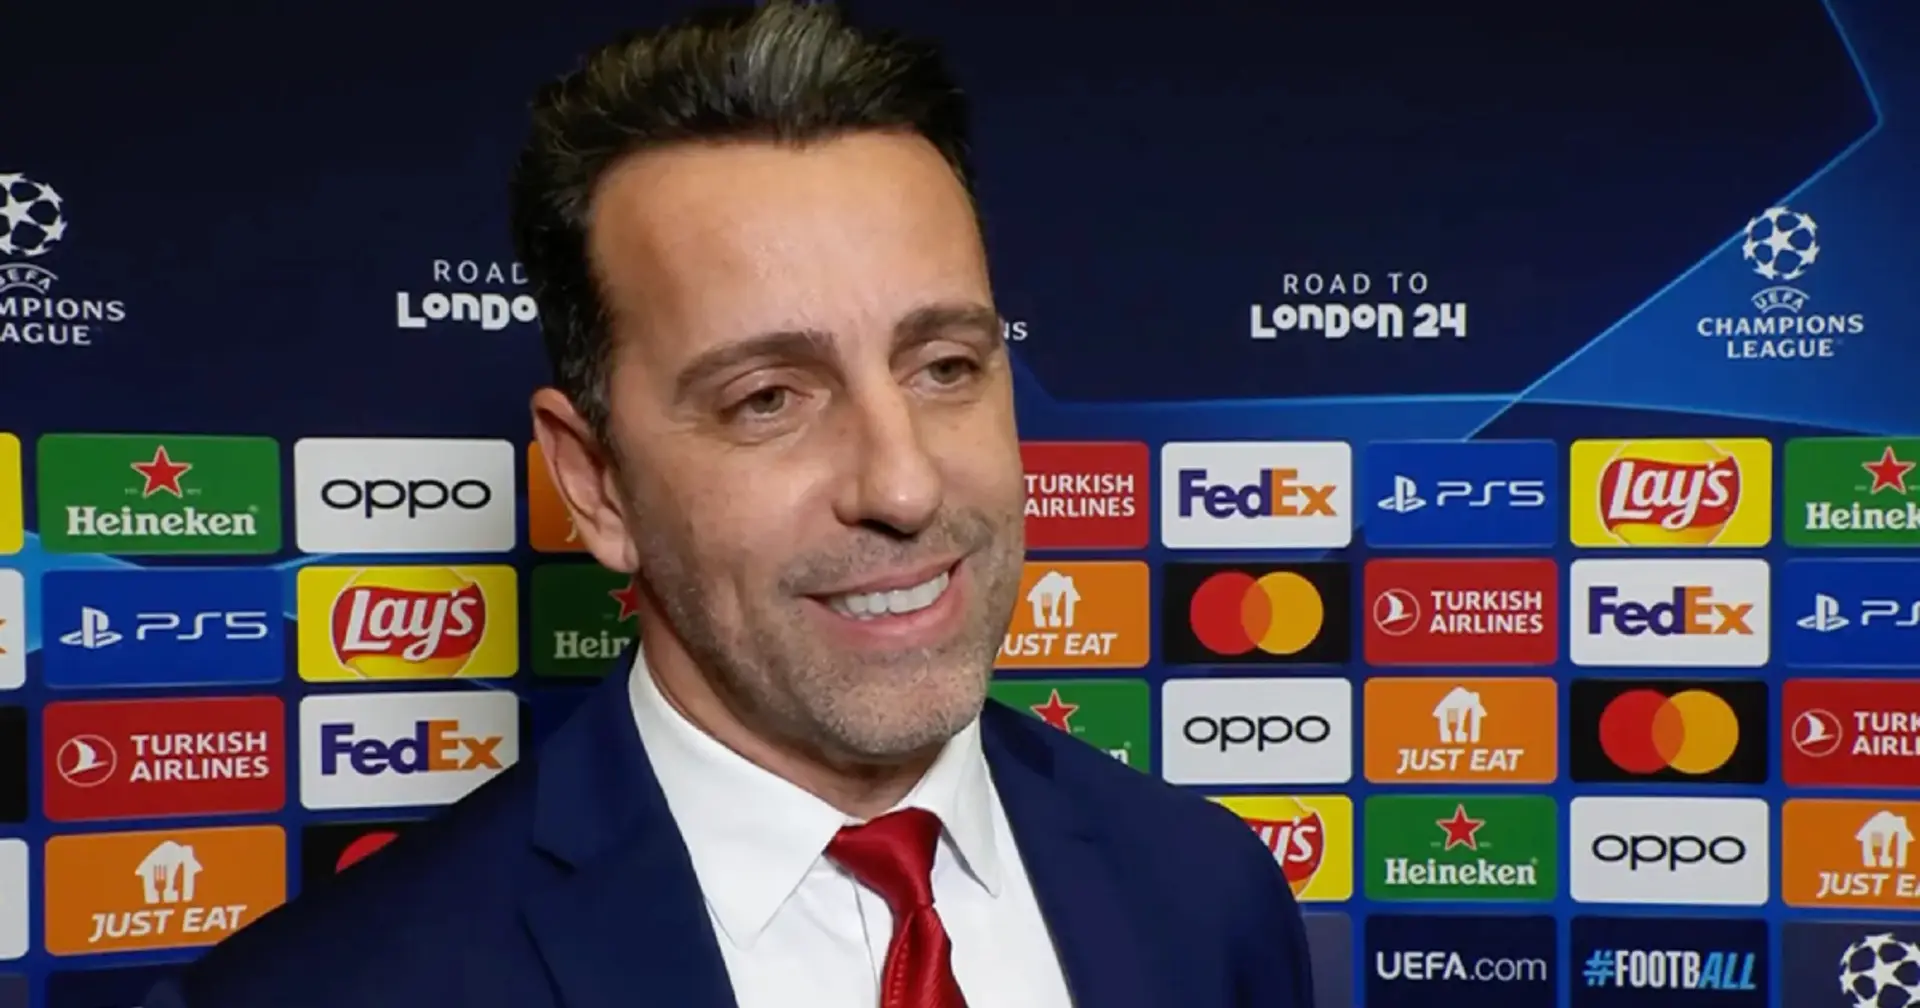 'We're playing at our best at the moment': Edu looking to make things right after Bayern draw